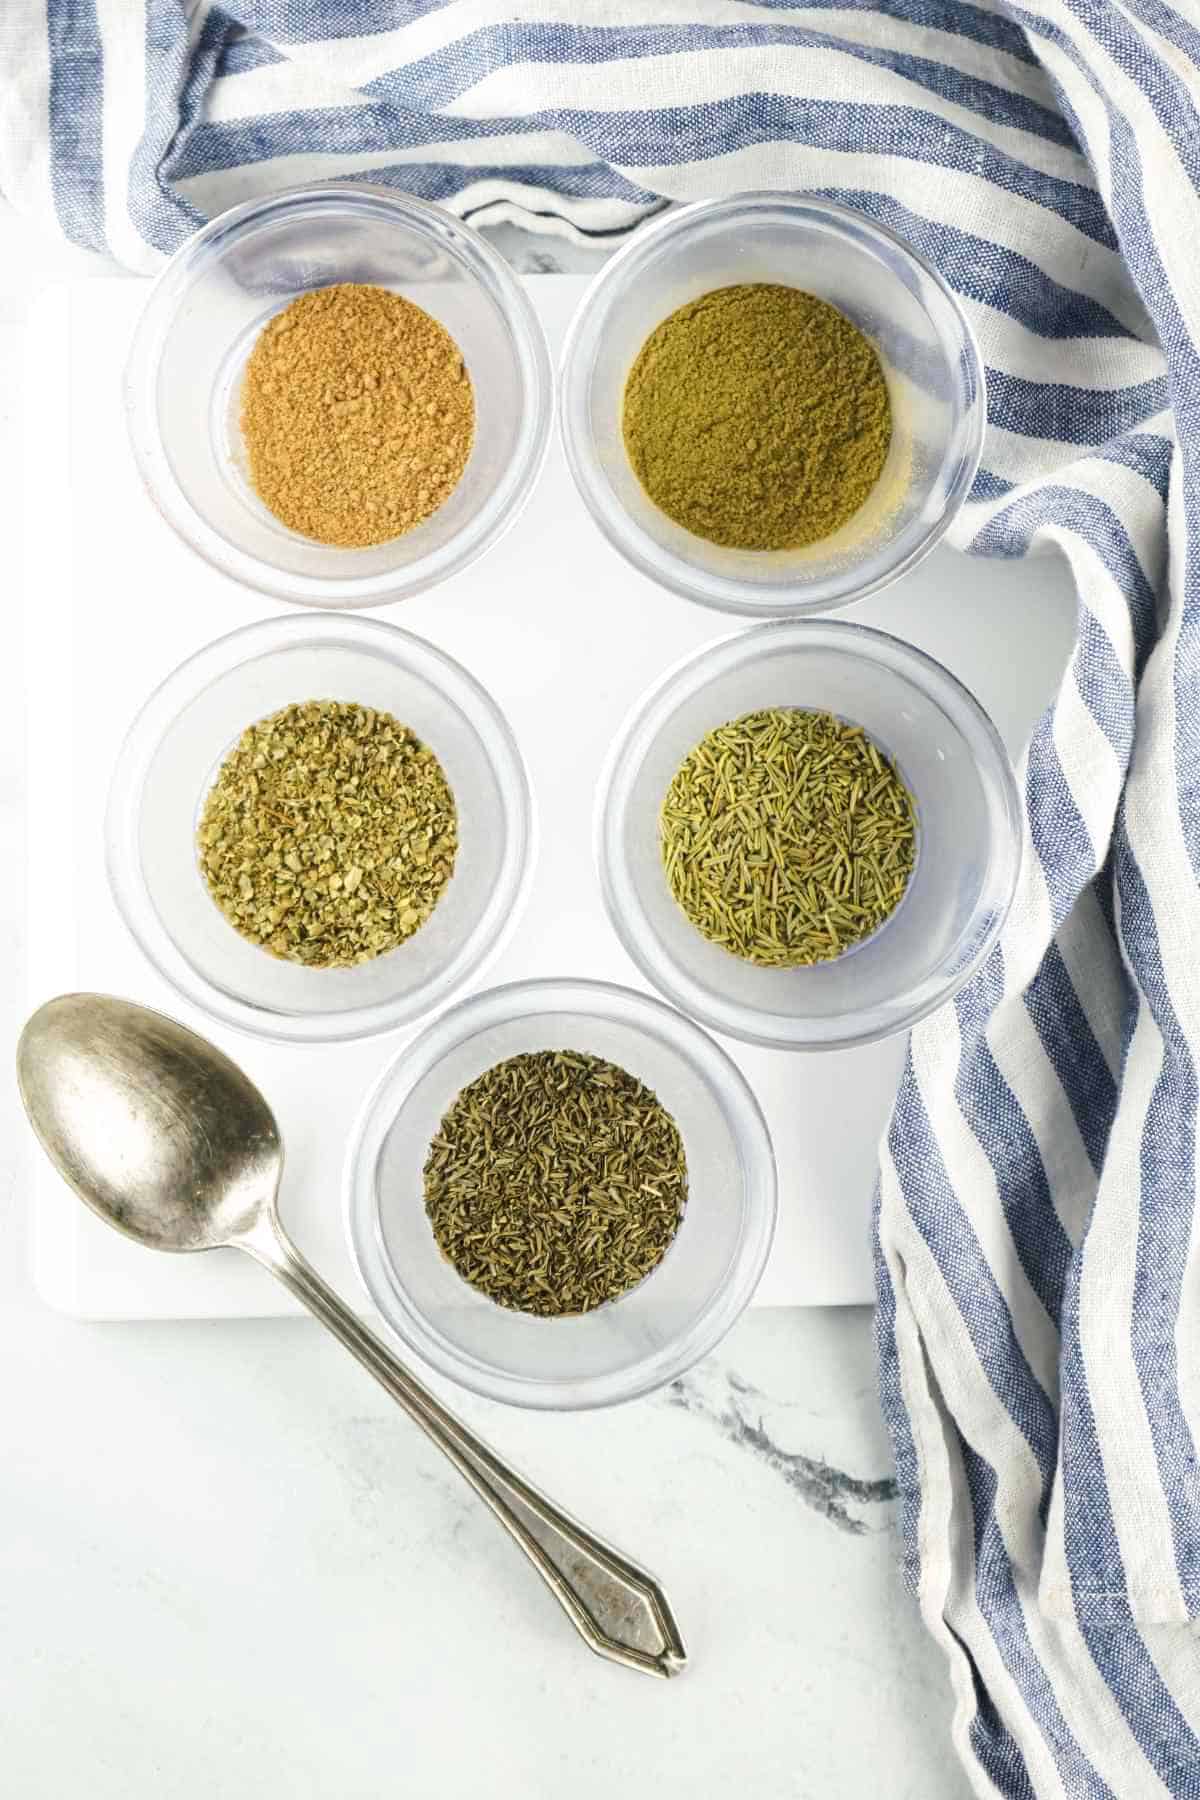 green herbs and spices in small bowls on a white background.